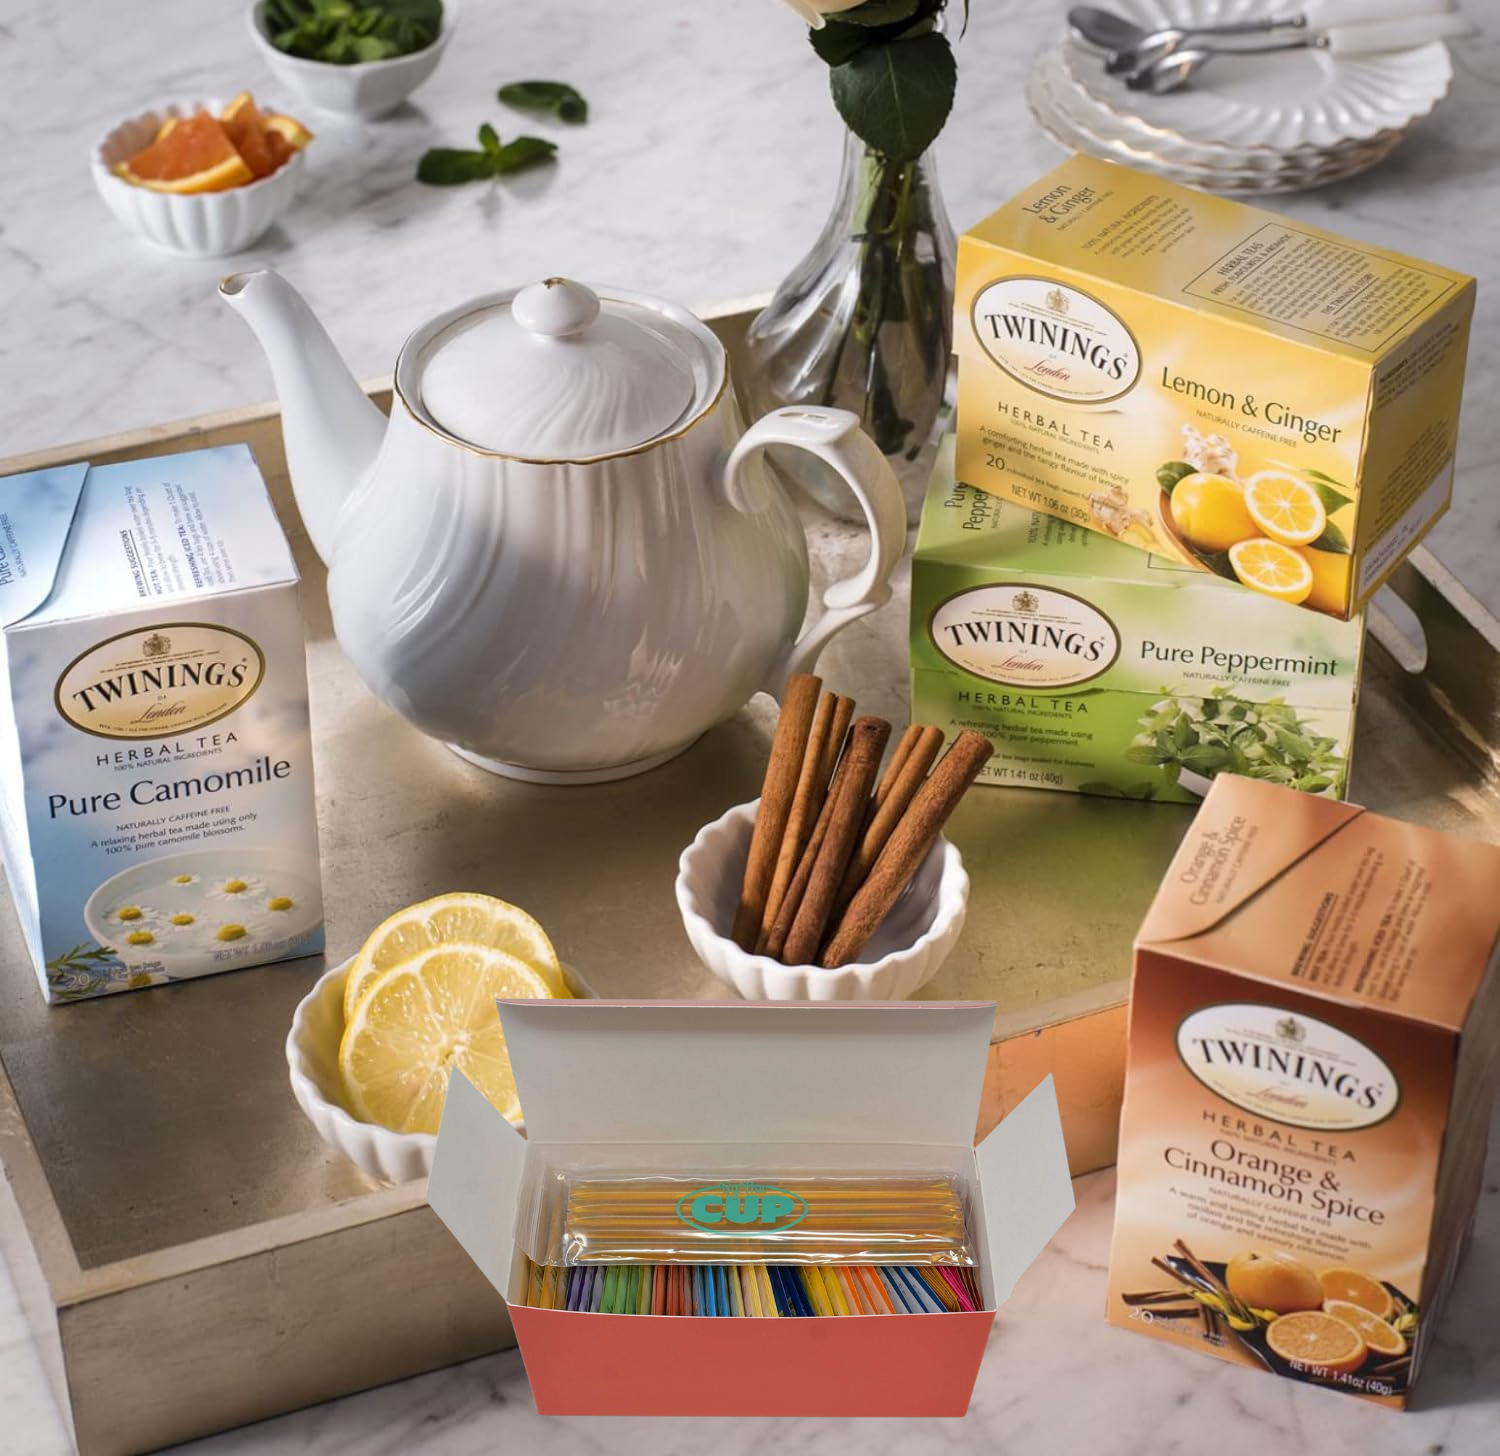 Hygge gifts—Herbal Tea Assortment of 40 packs with honey stick